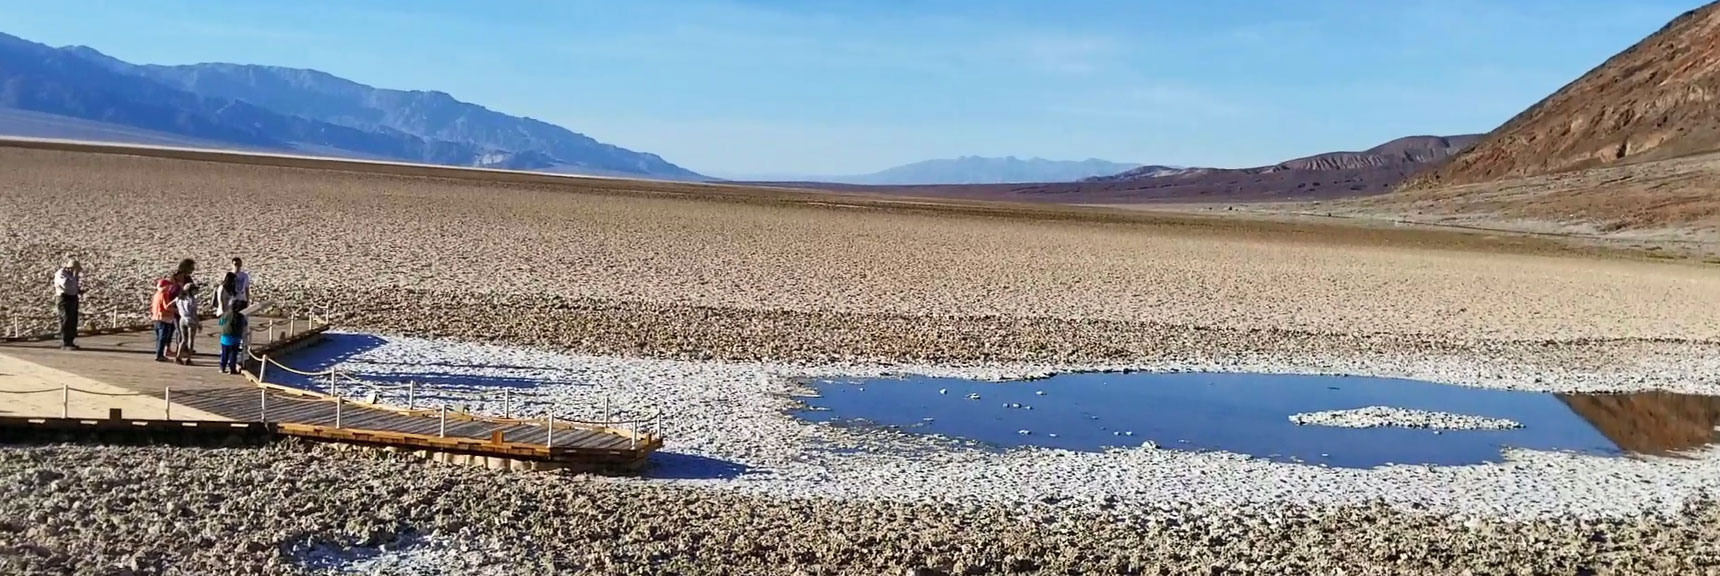 Badwater Basin | Death Valley National Park, California